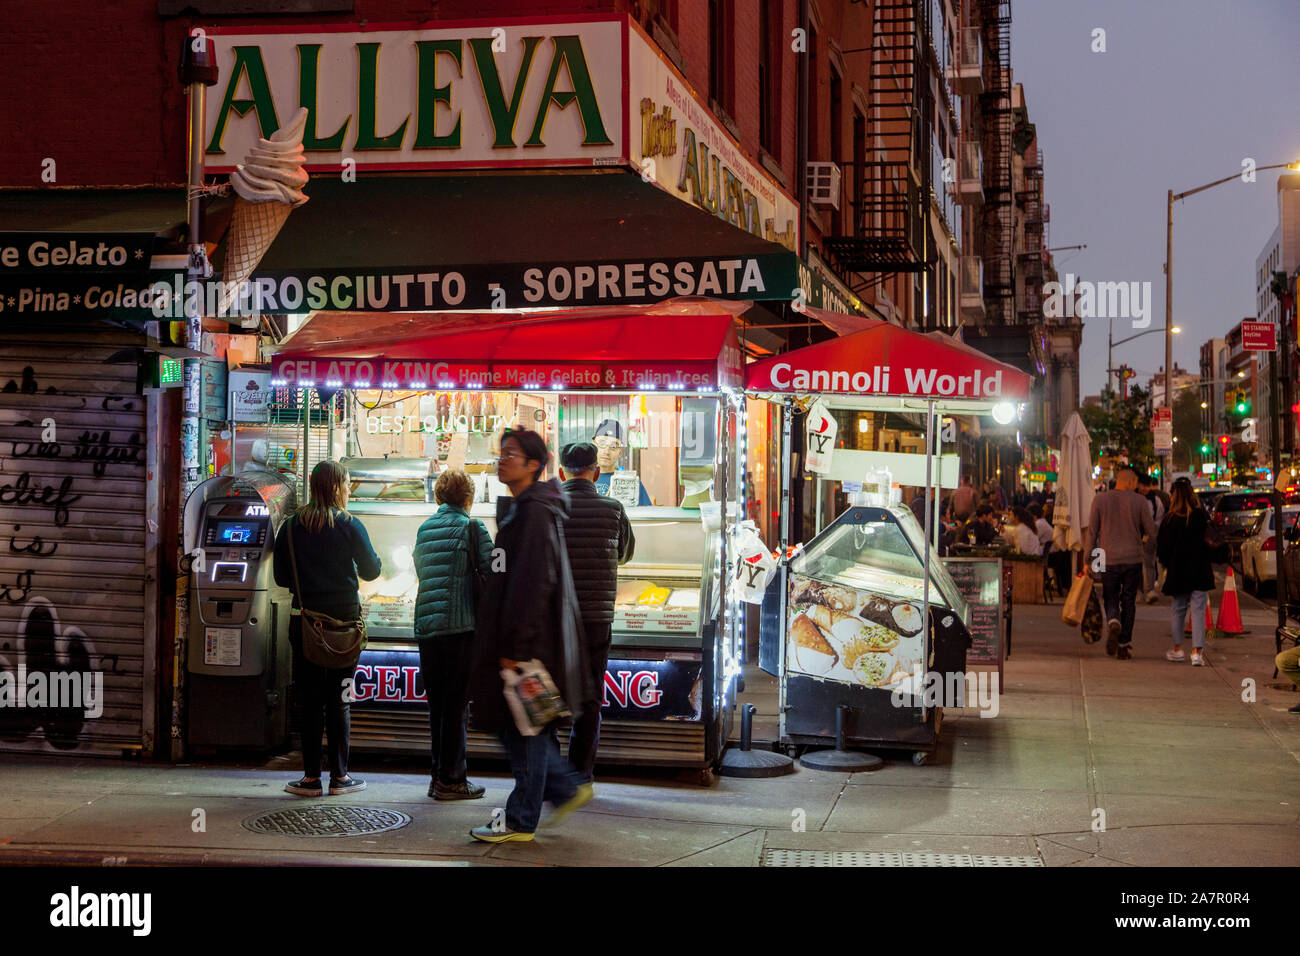 Alleva Italian Dairy at Grand and Mulberry Streets, Manhattan, New York, NY, United States of America. Stock Photo